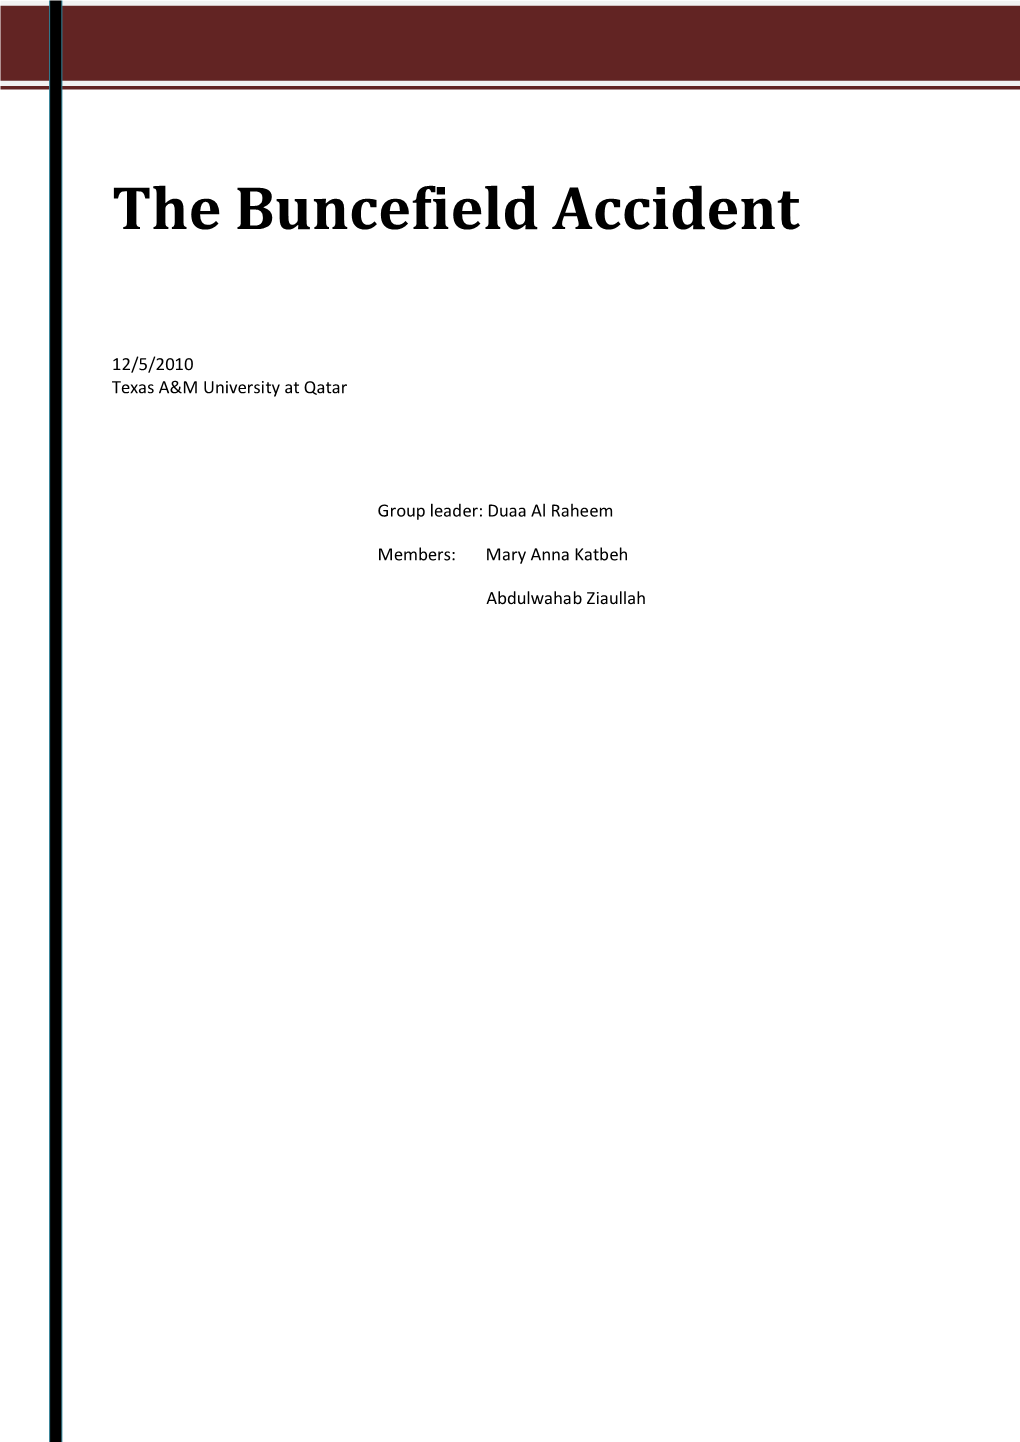 The Buncefield Accident